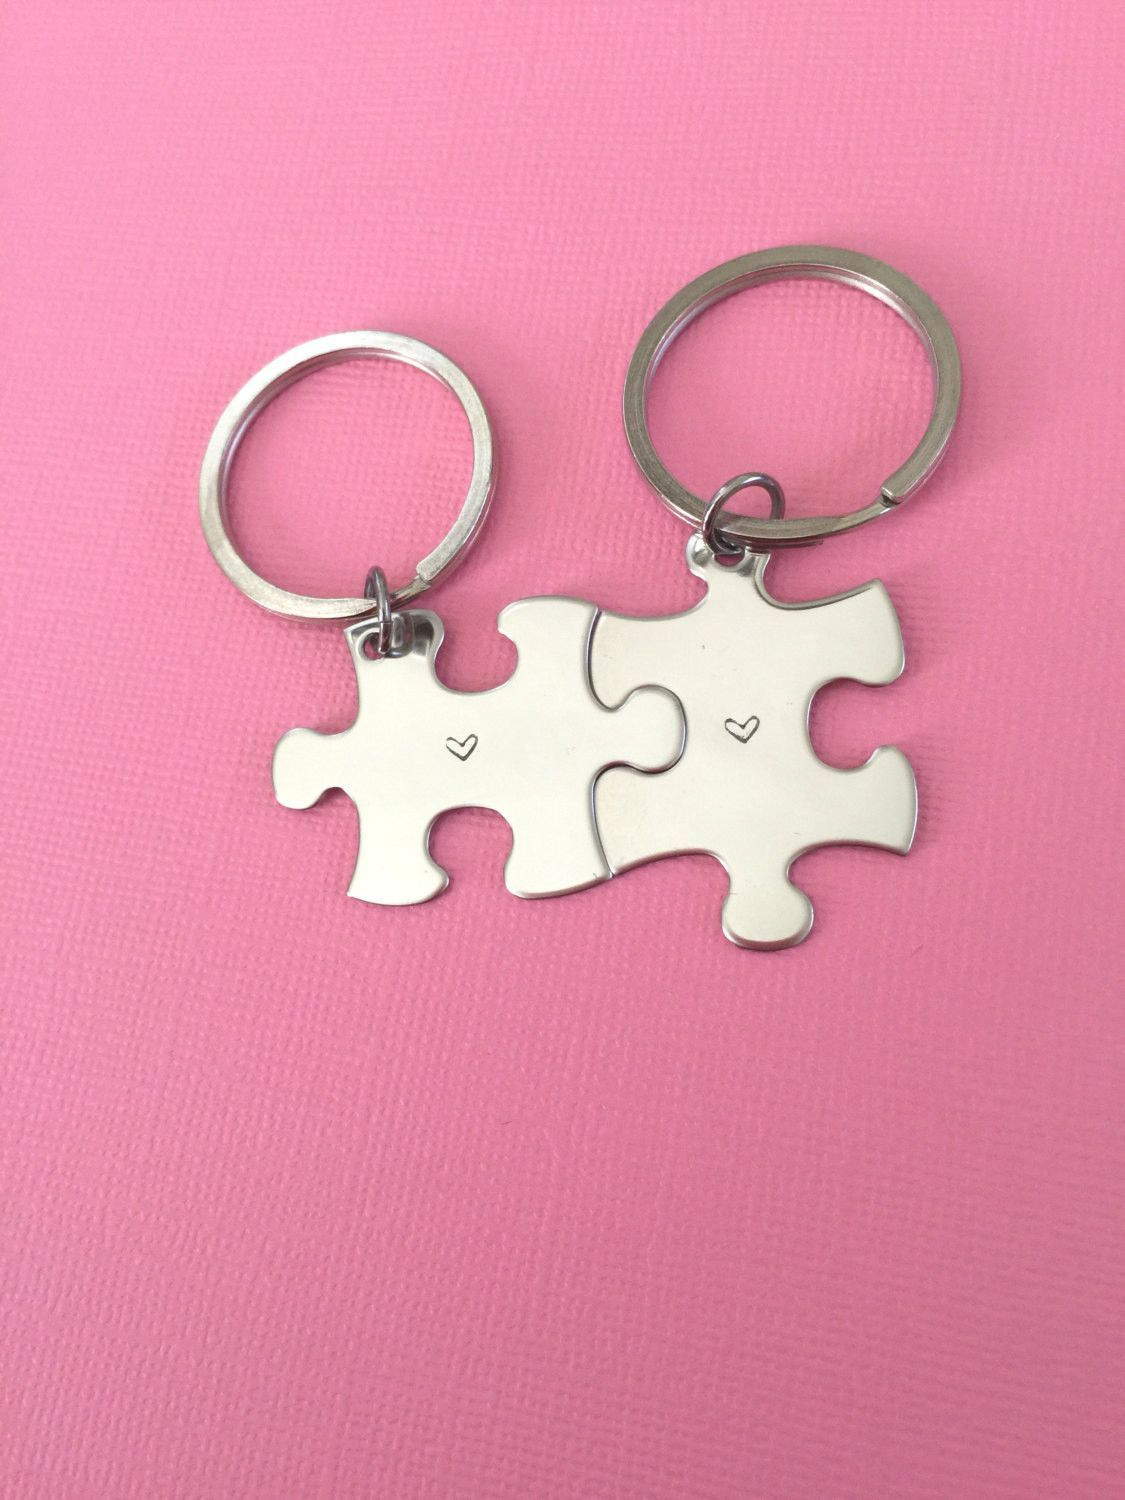 Gift Ideas For Couple Friends
 Couples Puzzle Keychains best friend keychains Heart